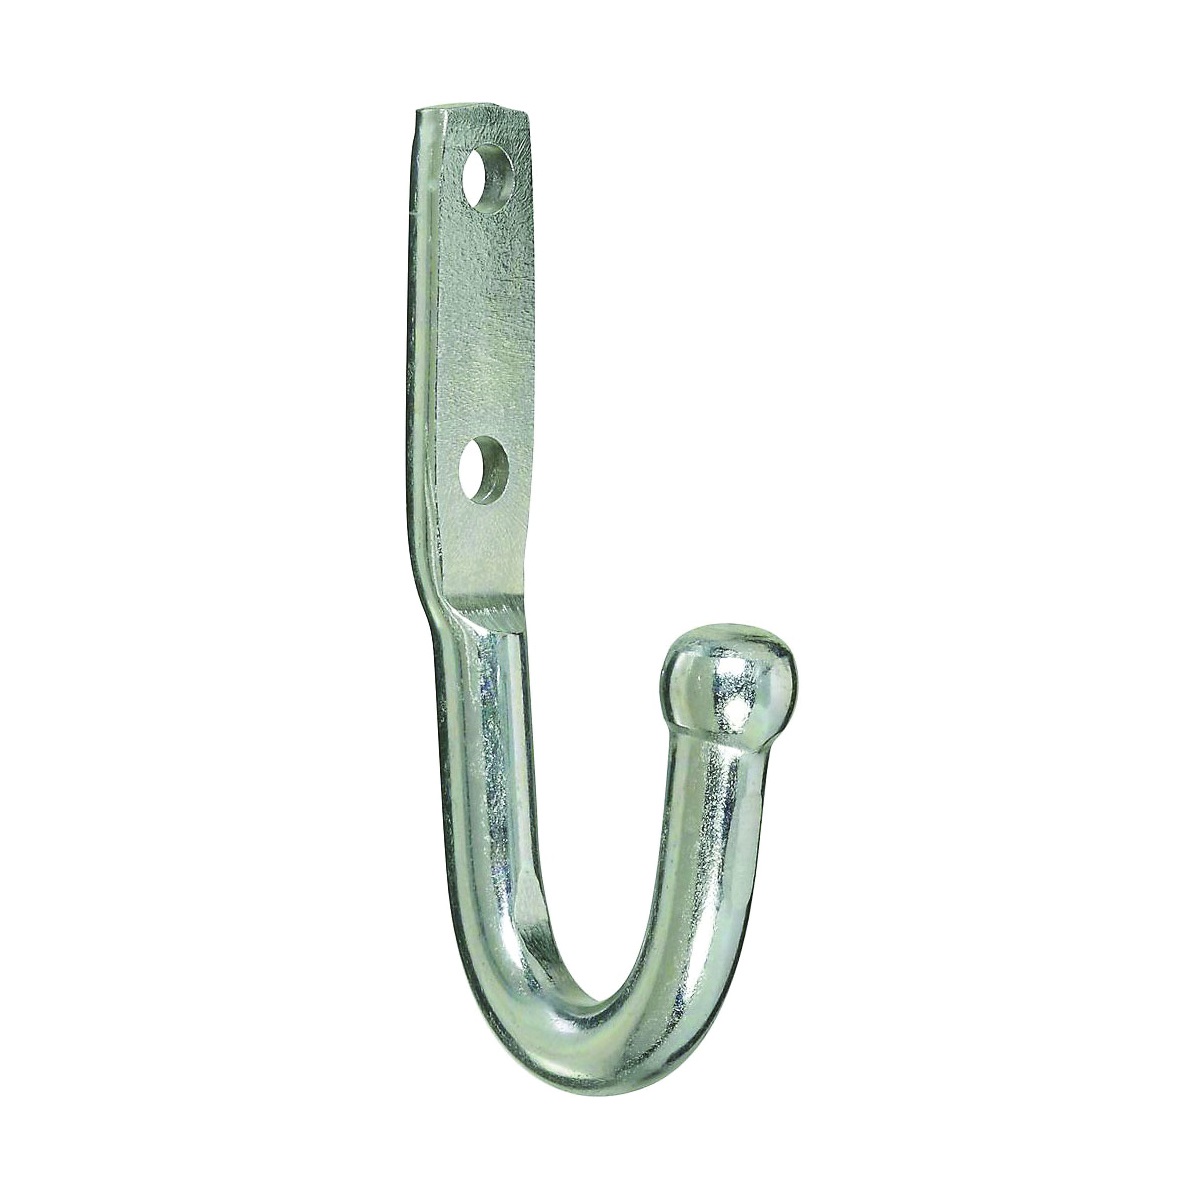 National Hardware MP2052BC Series N220-533 Tarp and Rope Hook, 260 lb Working Load, Steel, Zinc - 1